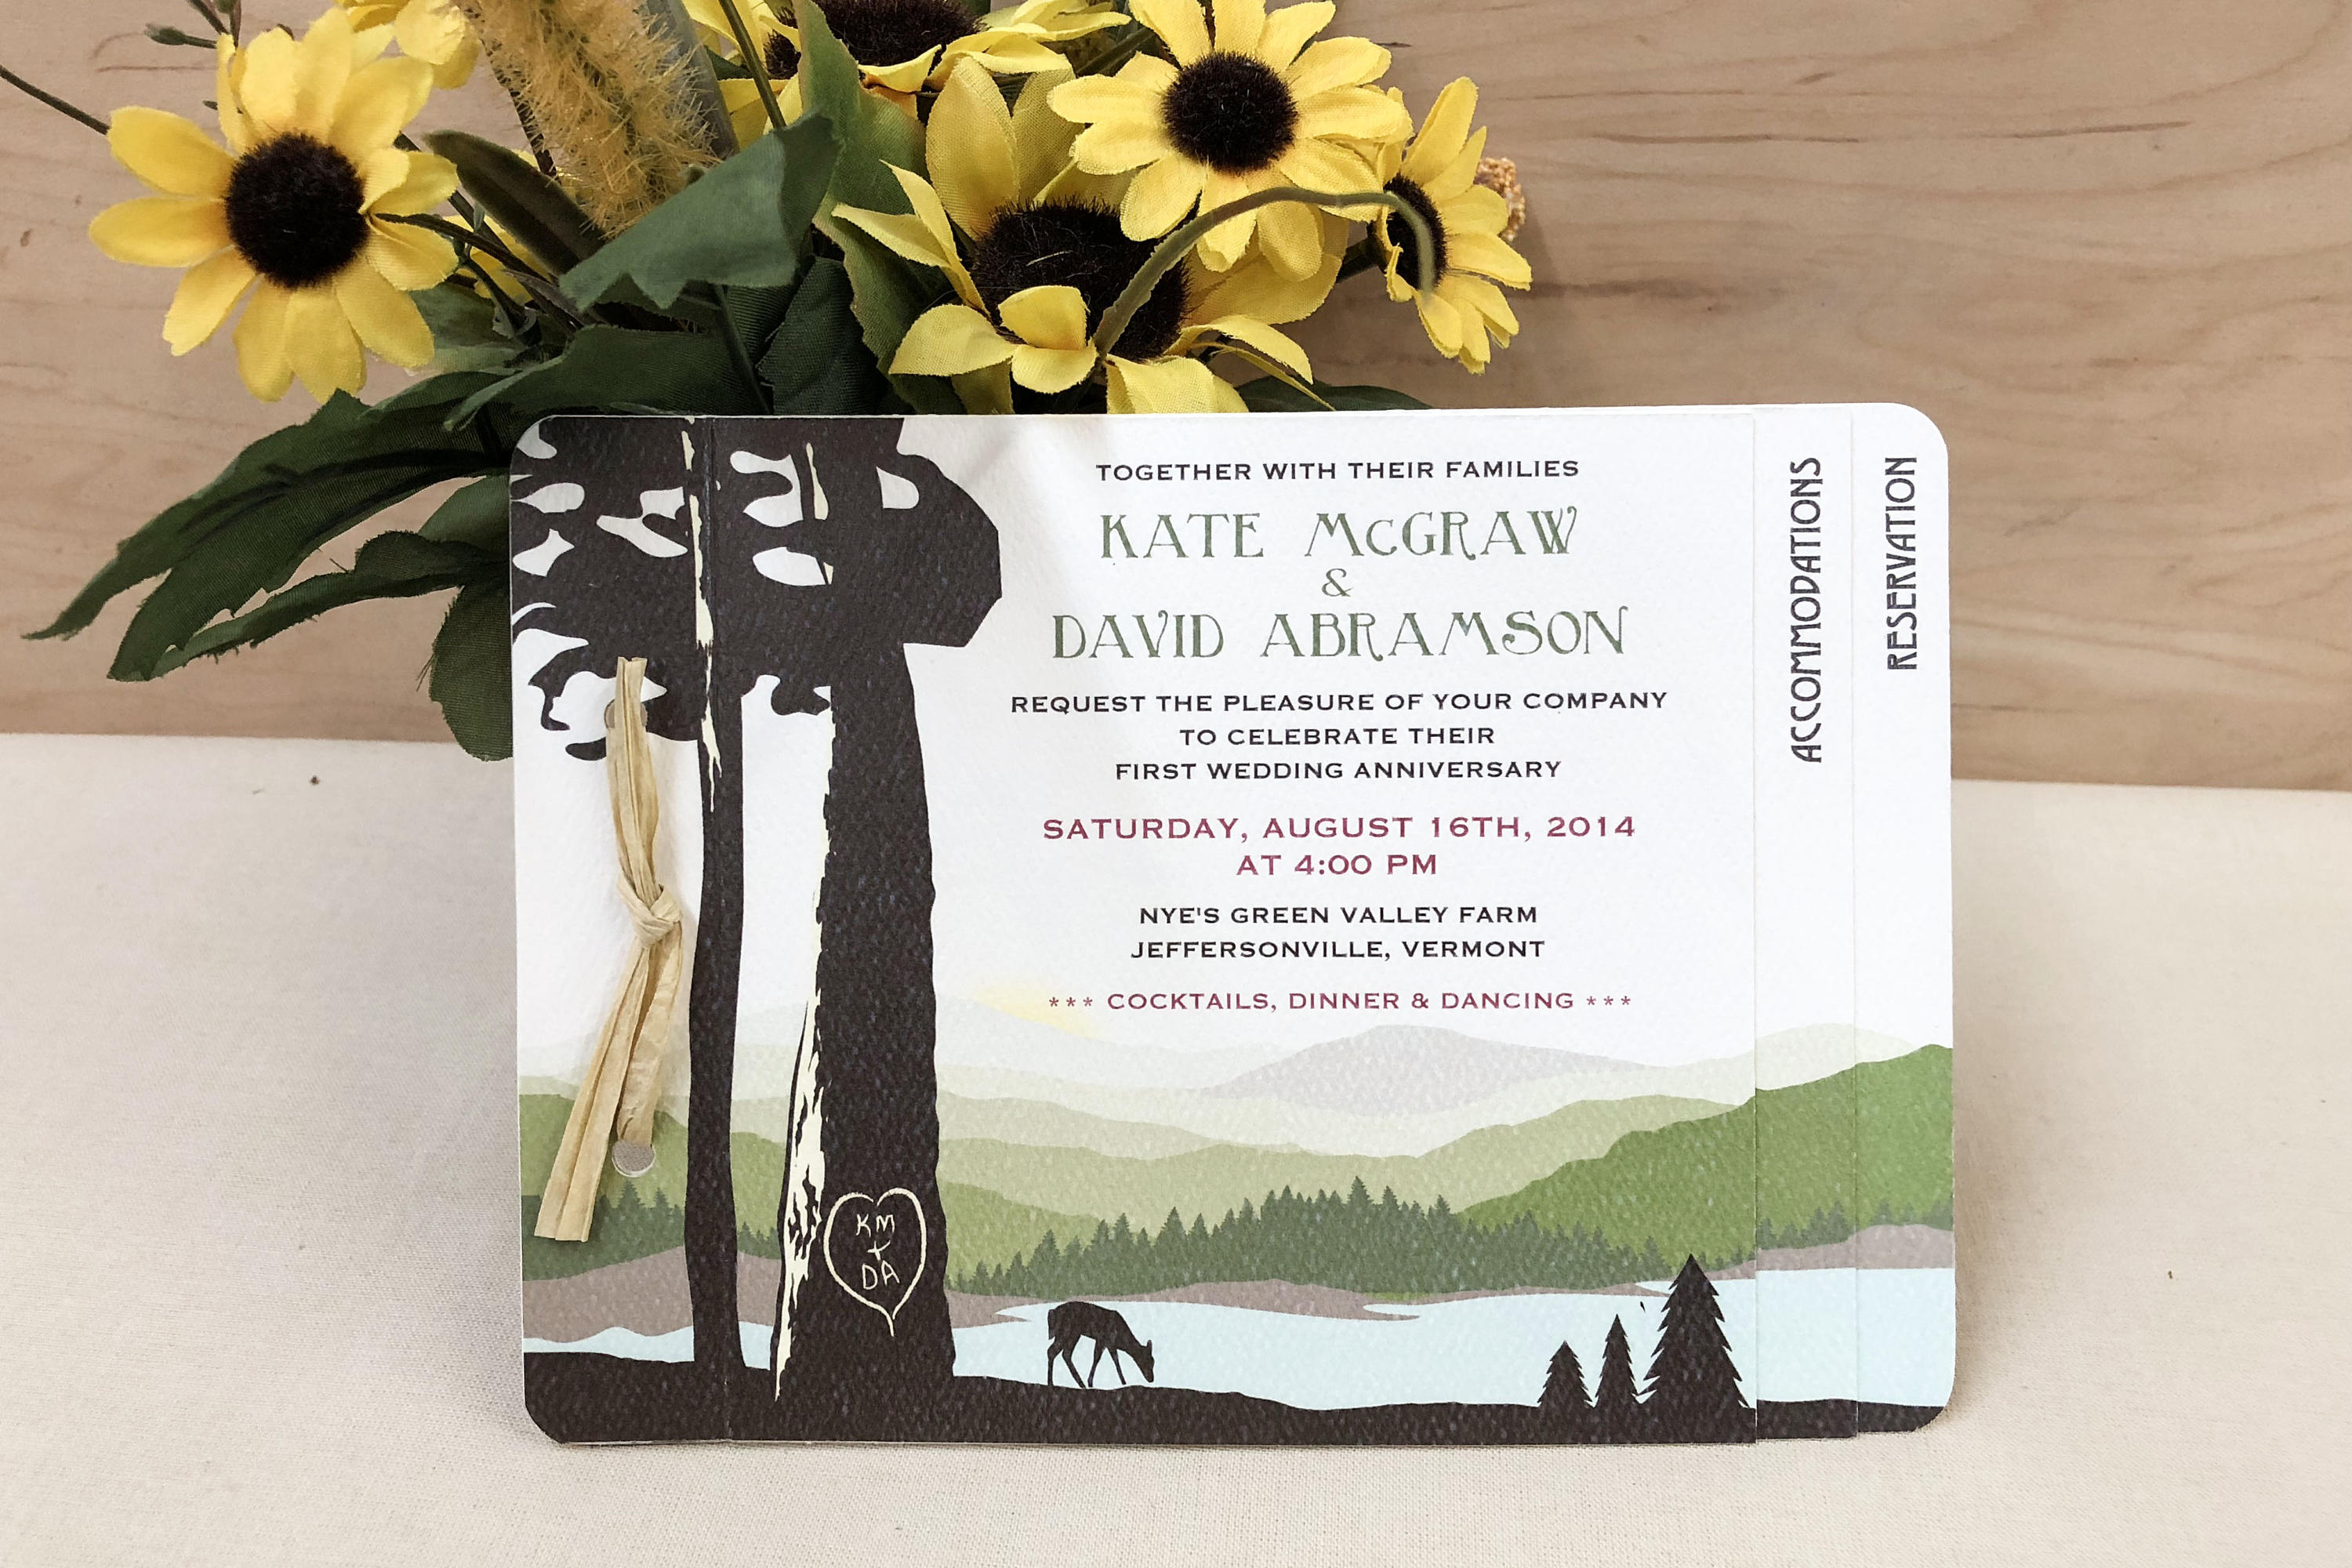 Rustic Green Appalachian Mountains 3pg Livret Wedding Invitation // Vermont Mountains with Lake and Deer - TE1